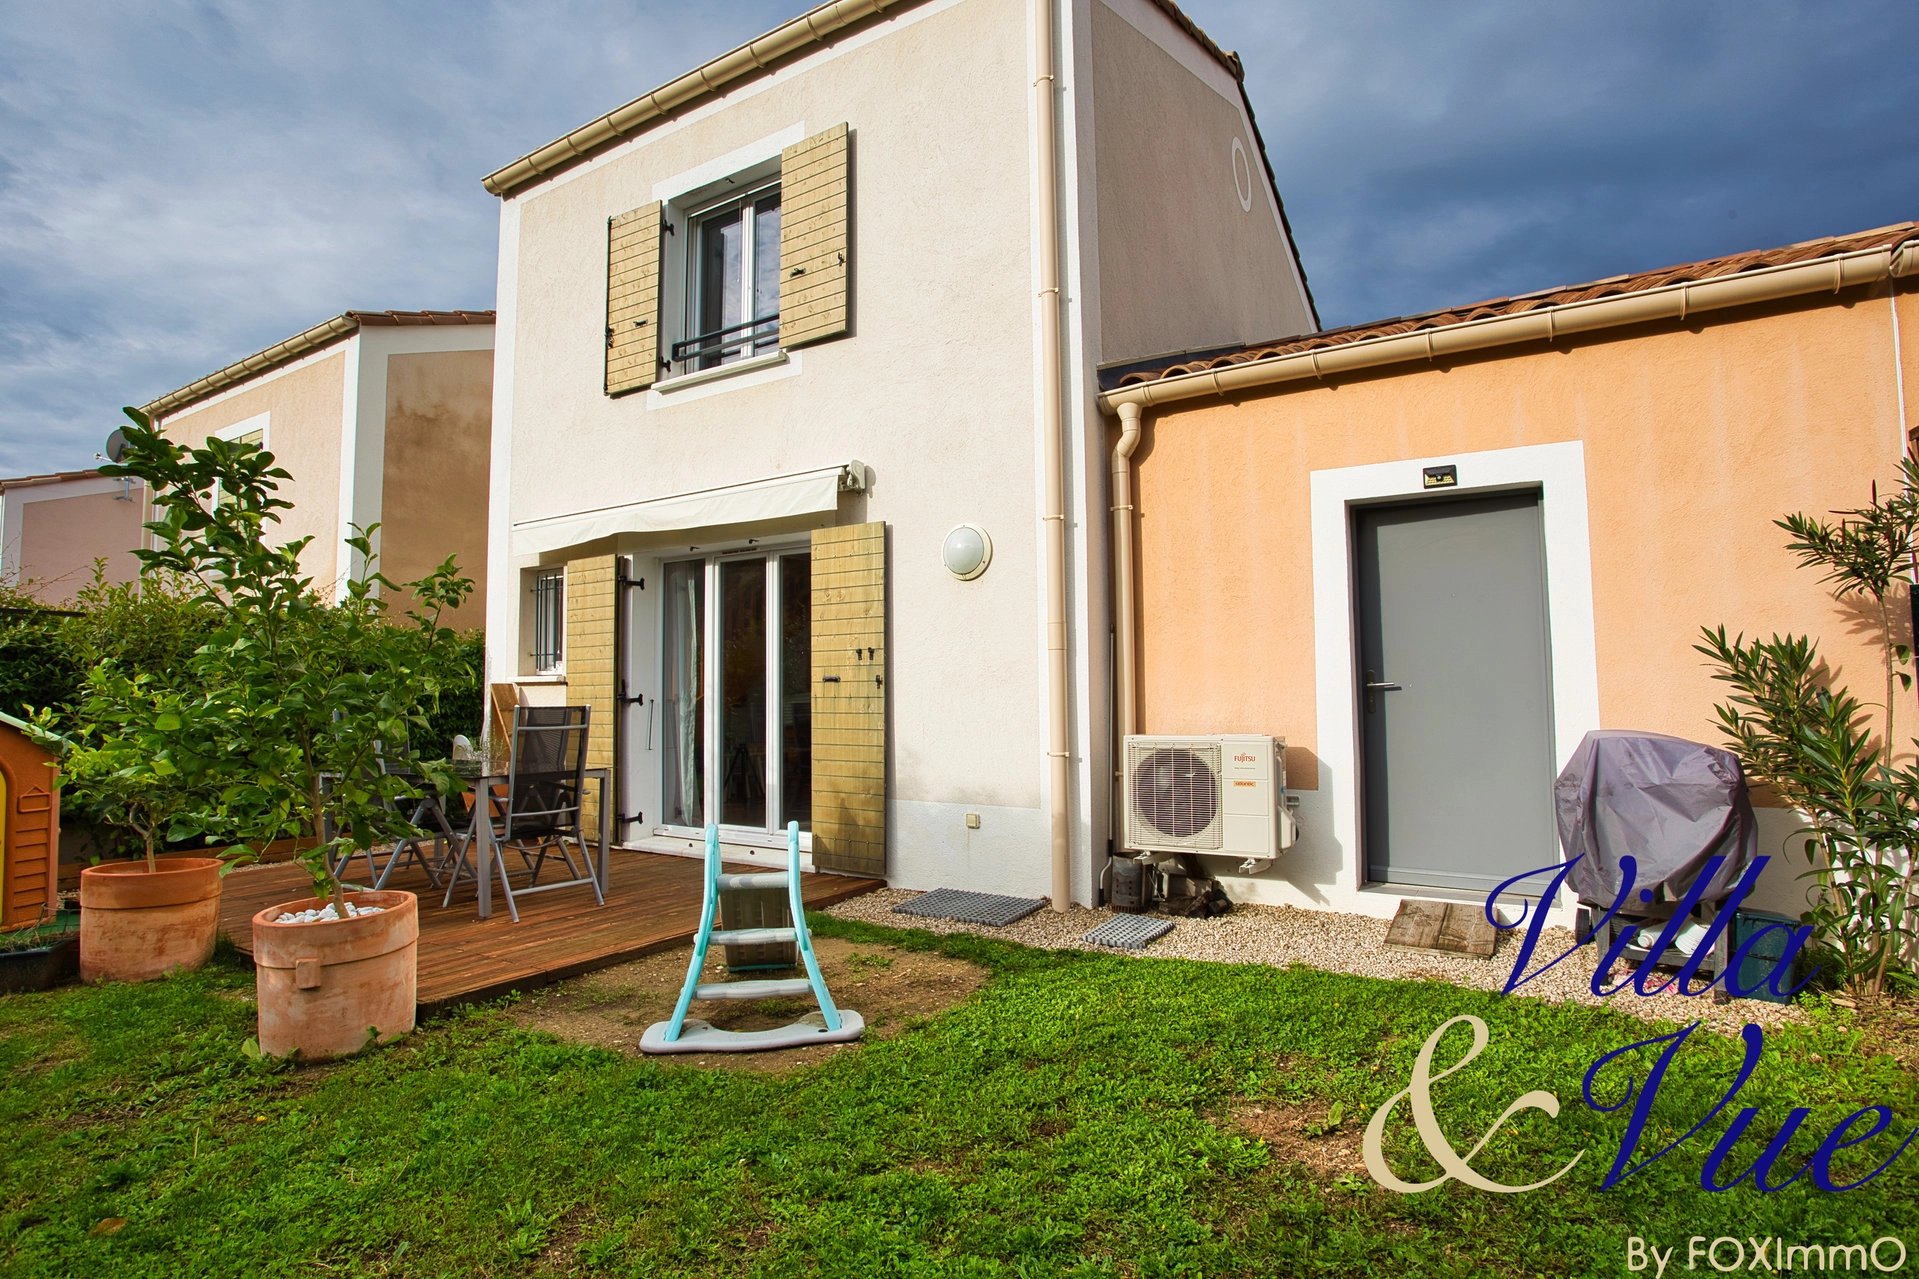 SOLD - Villa 3P 68.20 m² with private garden and garage